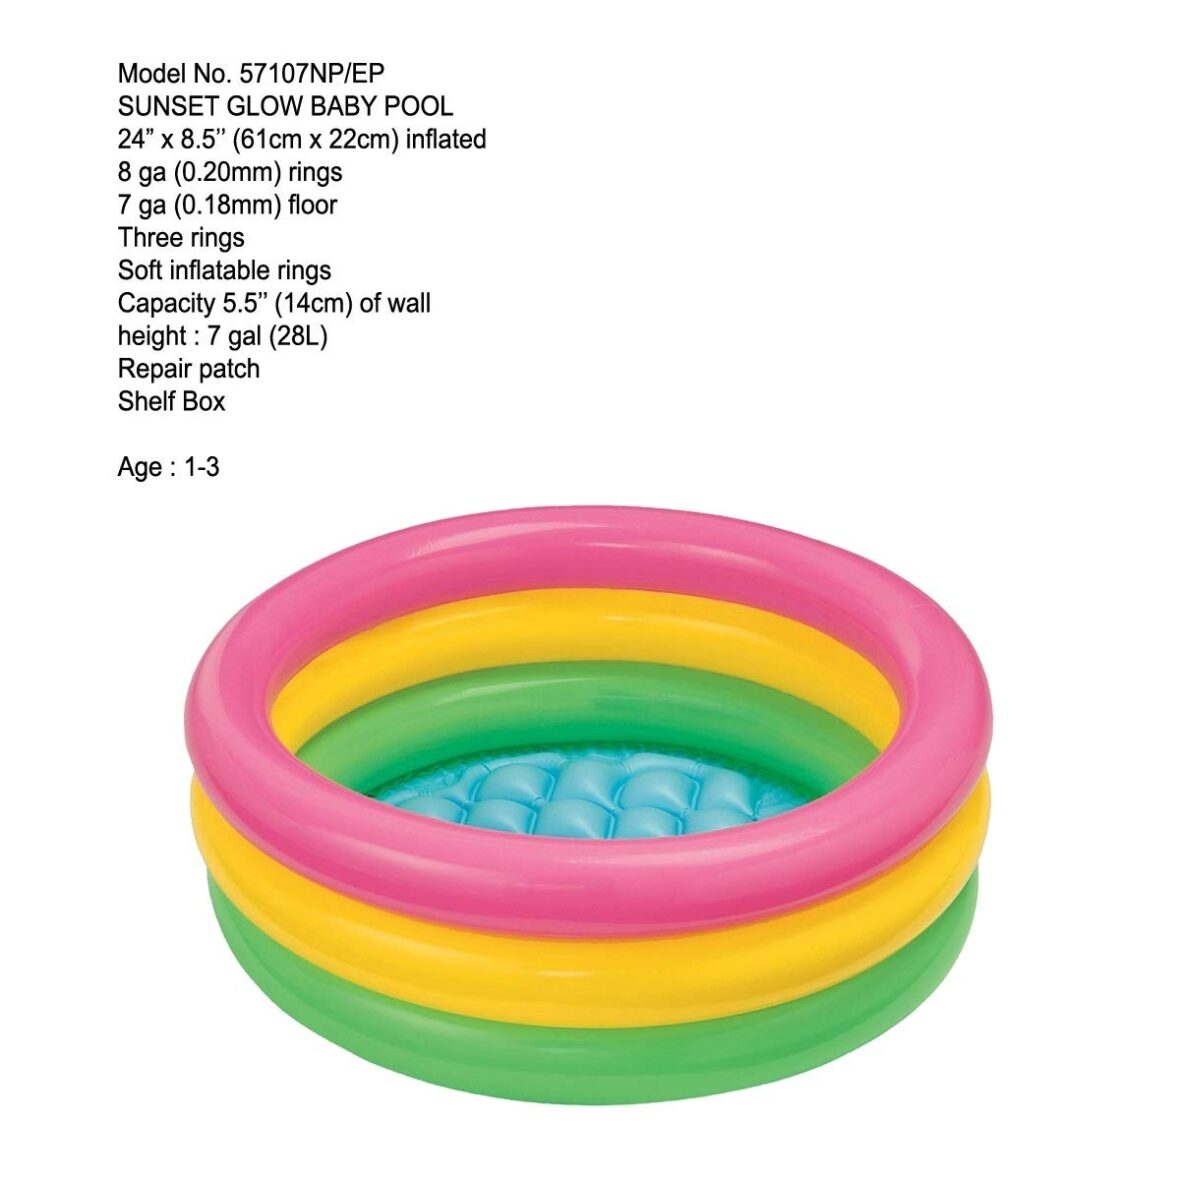 About this item Three rings Soft inflated floor Capacity 18cm of wall height Capacity 18cm of wall height repair patches For both boys and girls